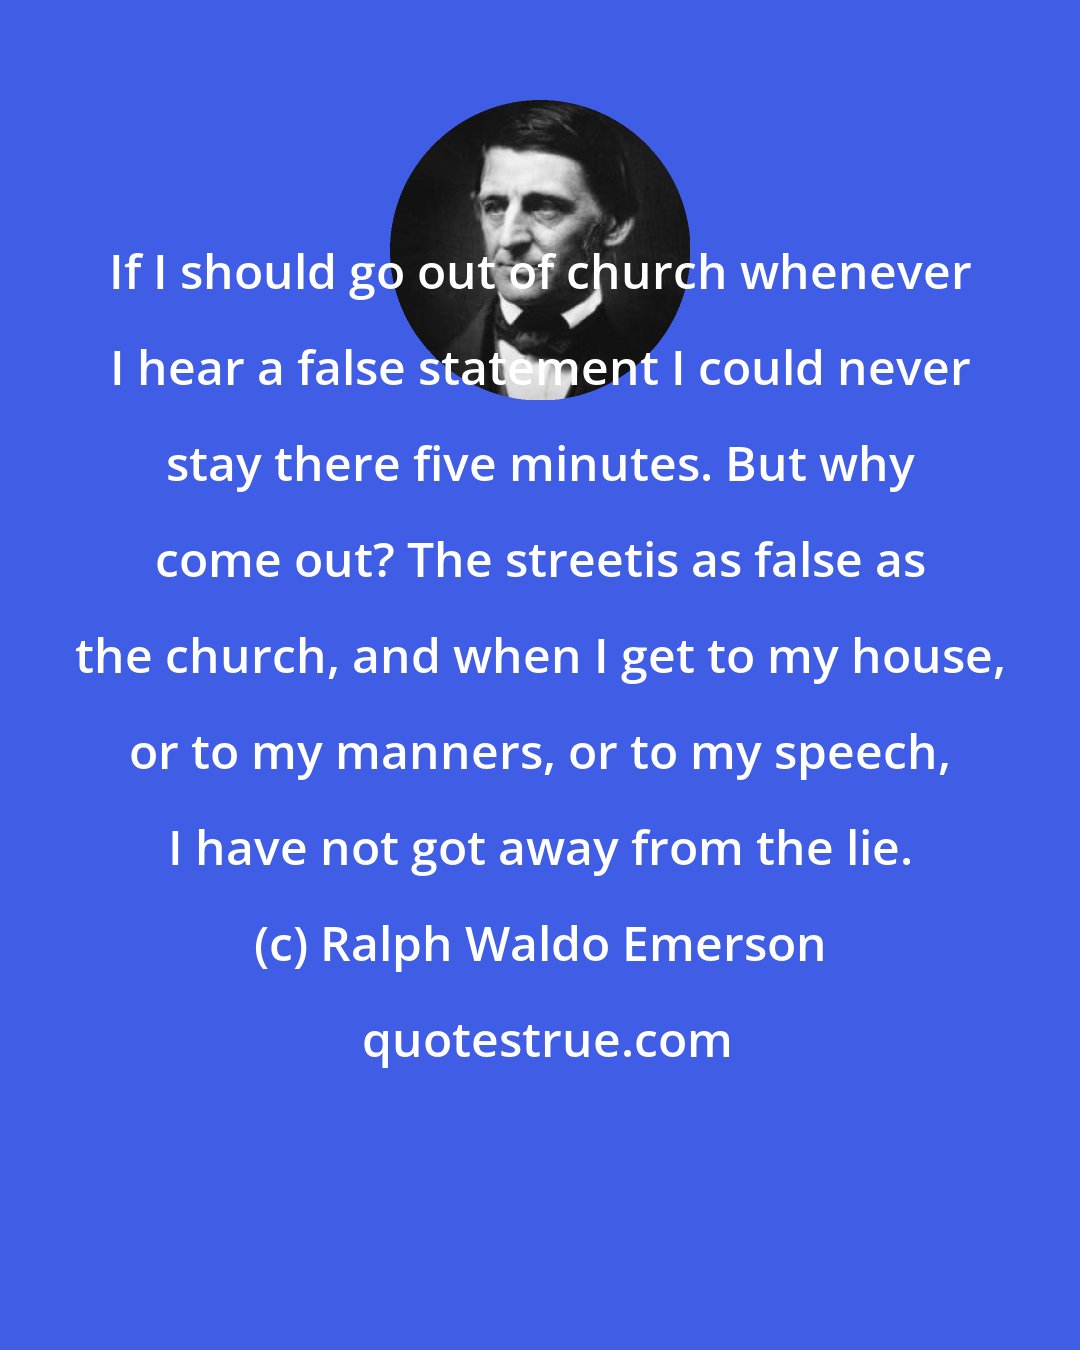 Ralph Waldo Emerson: If I should go out of church whenever I hear a false statement I could never stay there five minutes. But why come out? The streetis as false as the church, and when I get to my house, or to my manners, or to my speech, I have not got away from the lie.